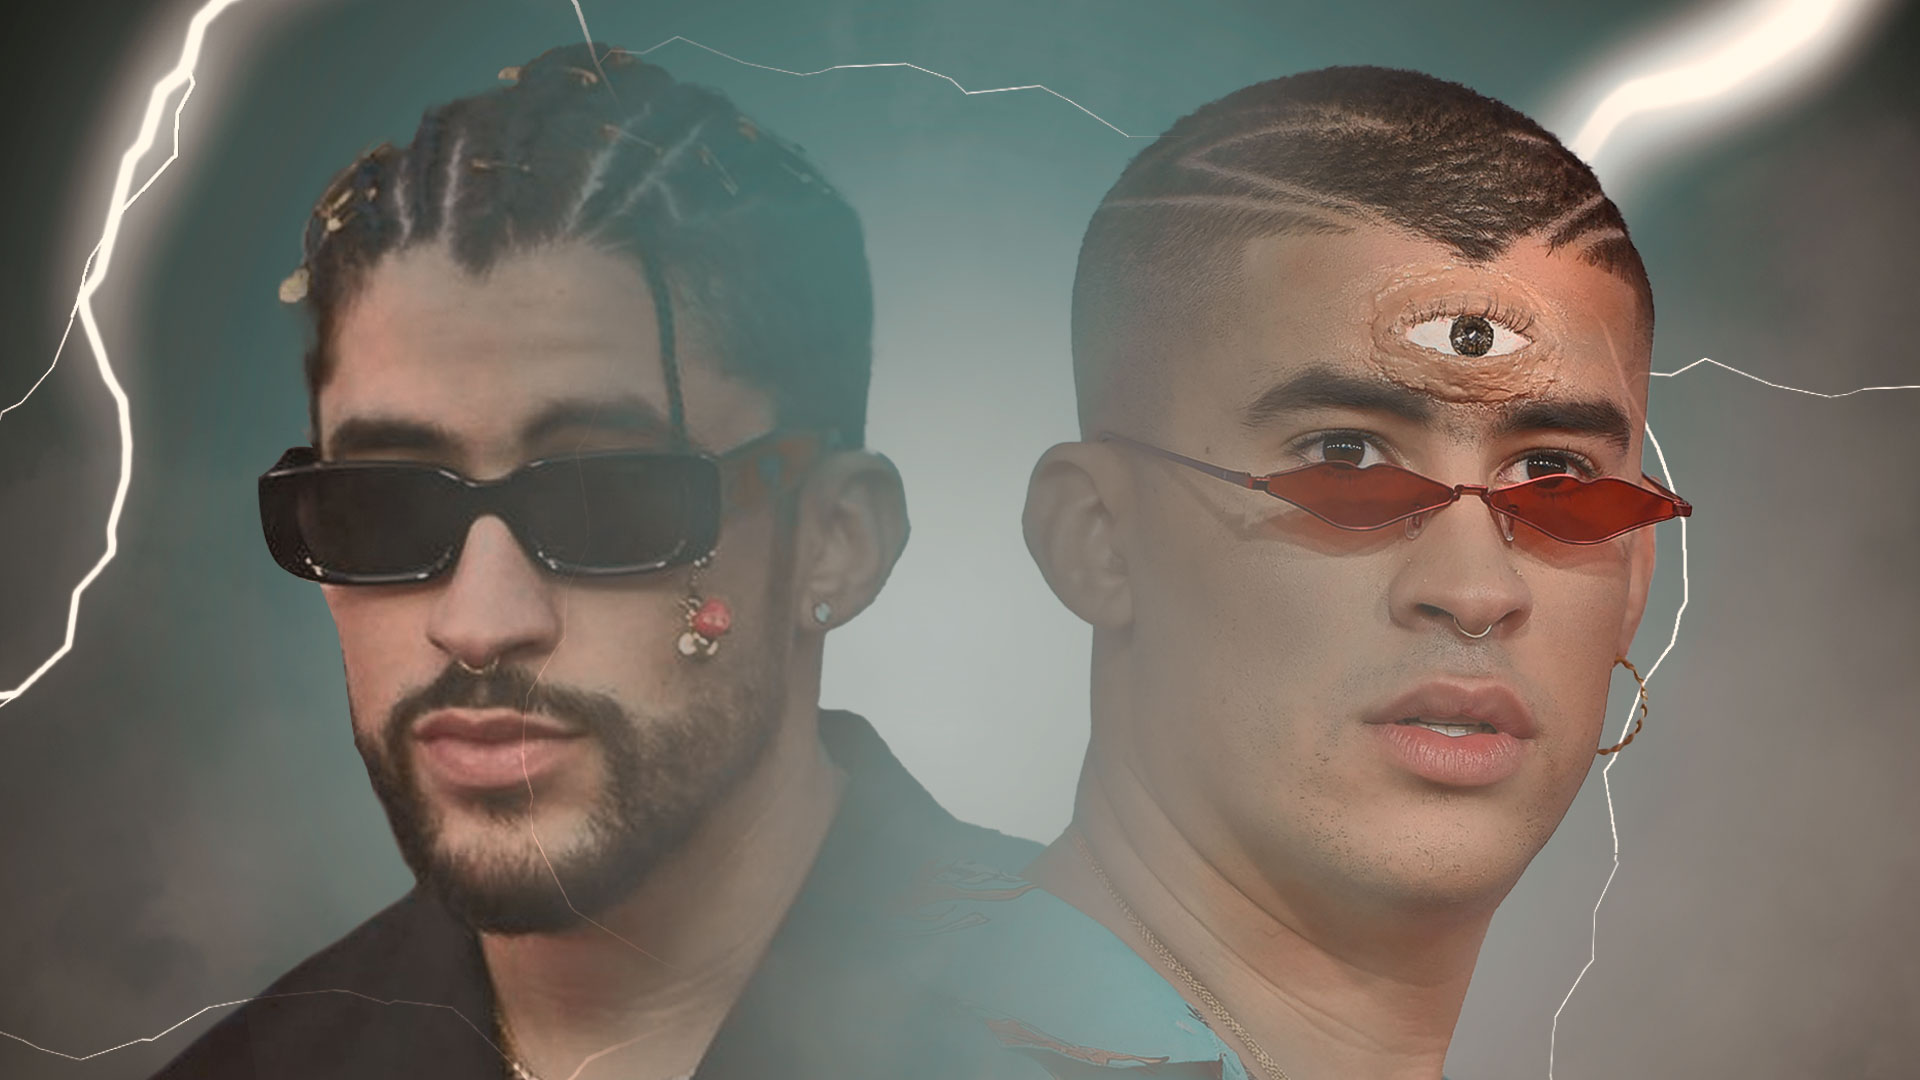 From trap to being the most listened to artist in the world: the story behind Bad Bunny (Photo: Infobae/Jovani Perez)